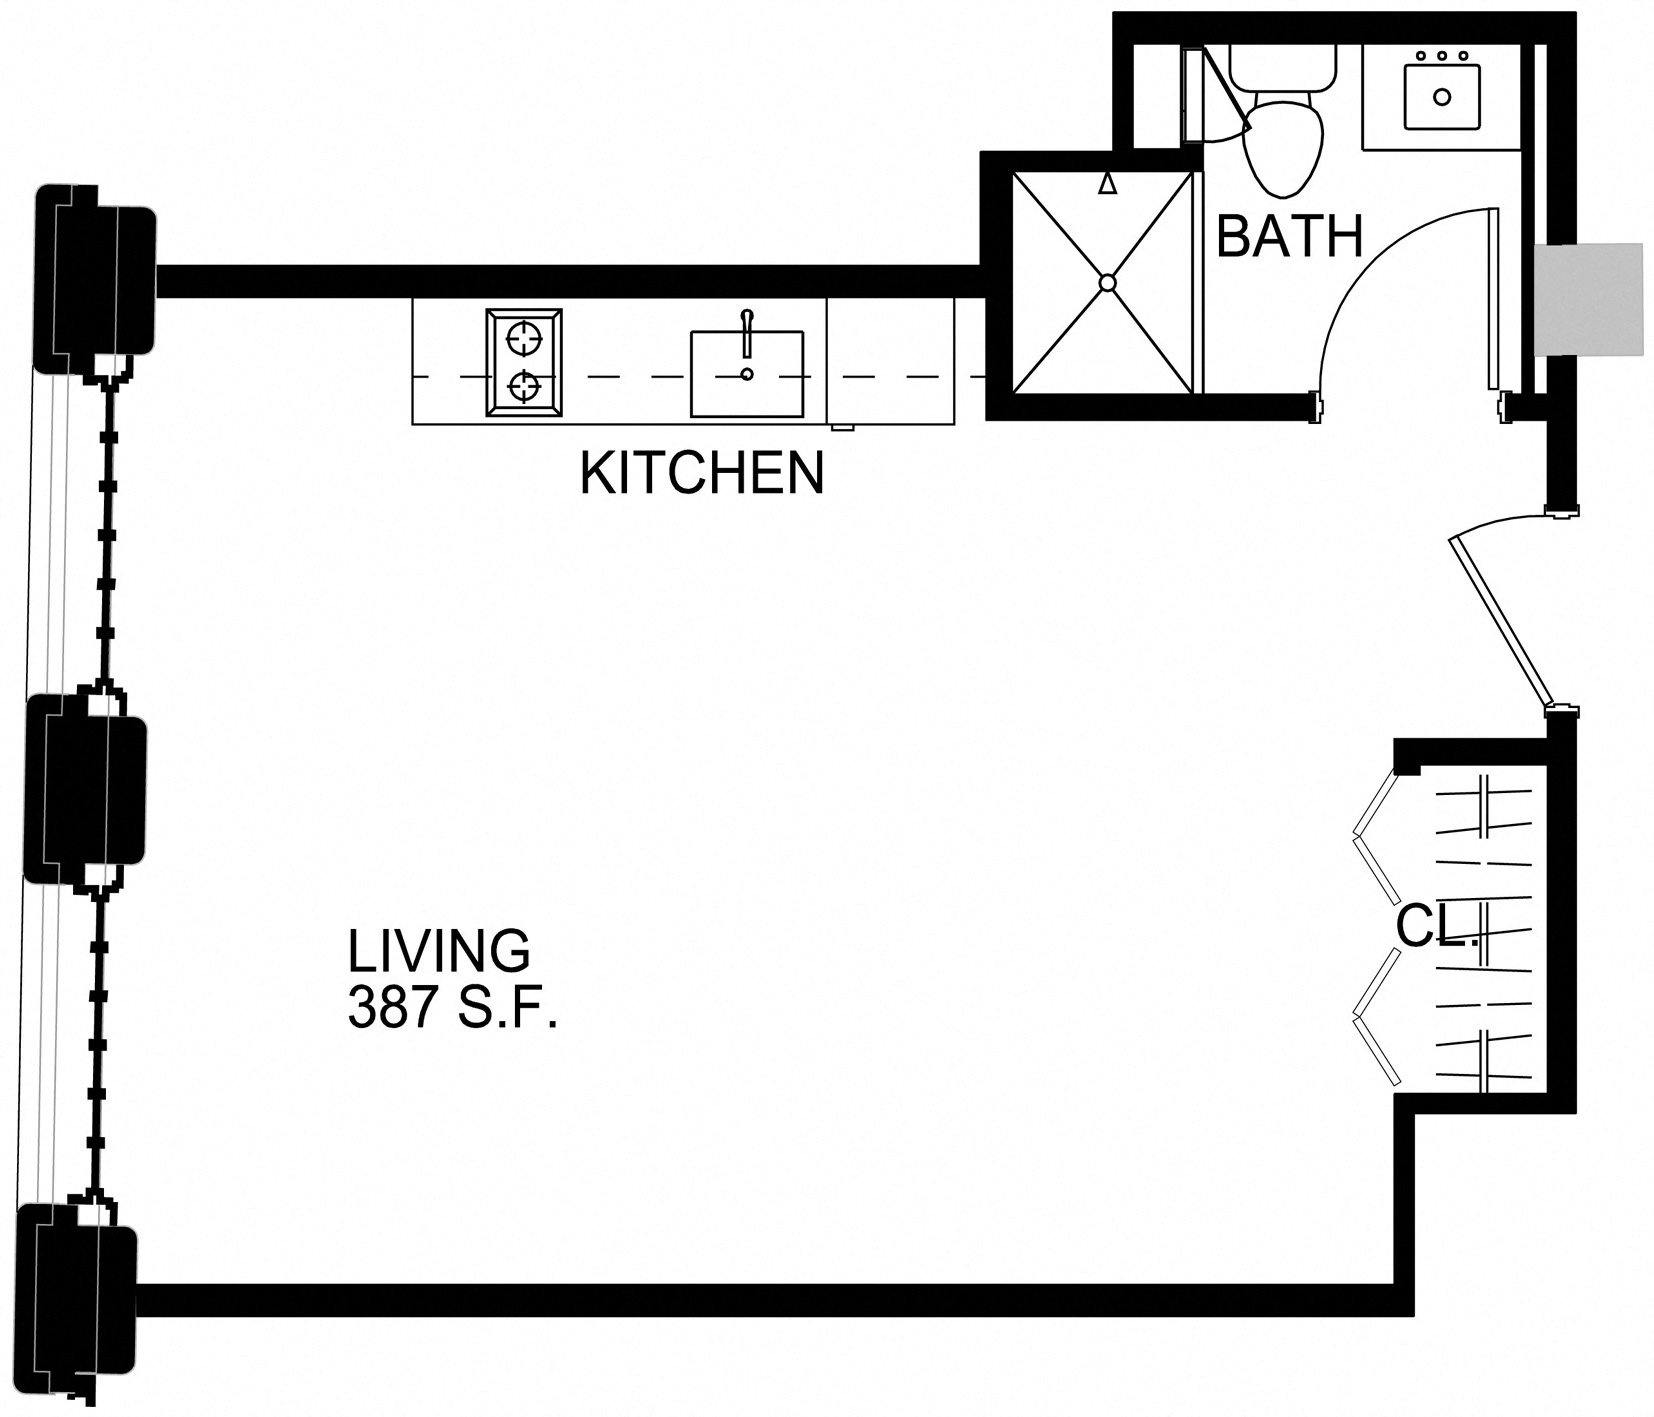 Floorplan for Apartment #S2403, 0 bedroom unit at Halstead Providence